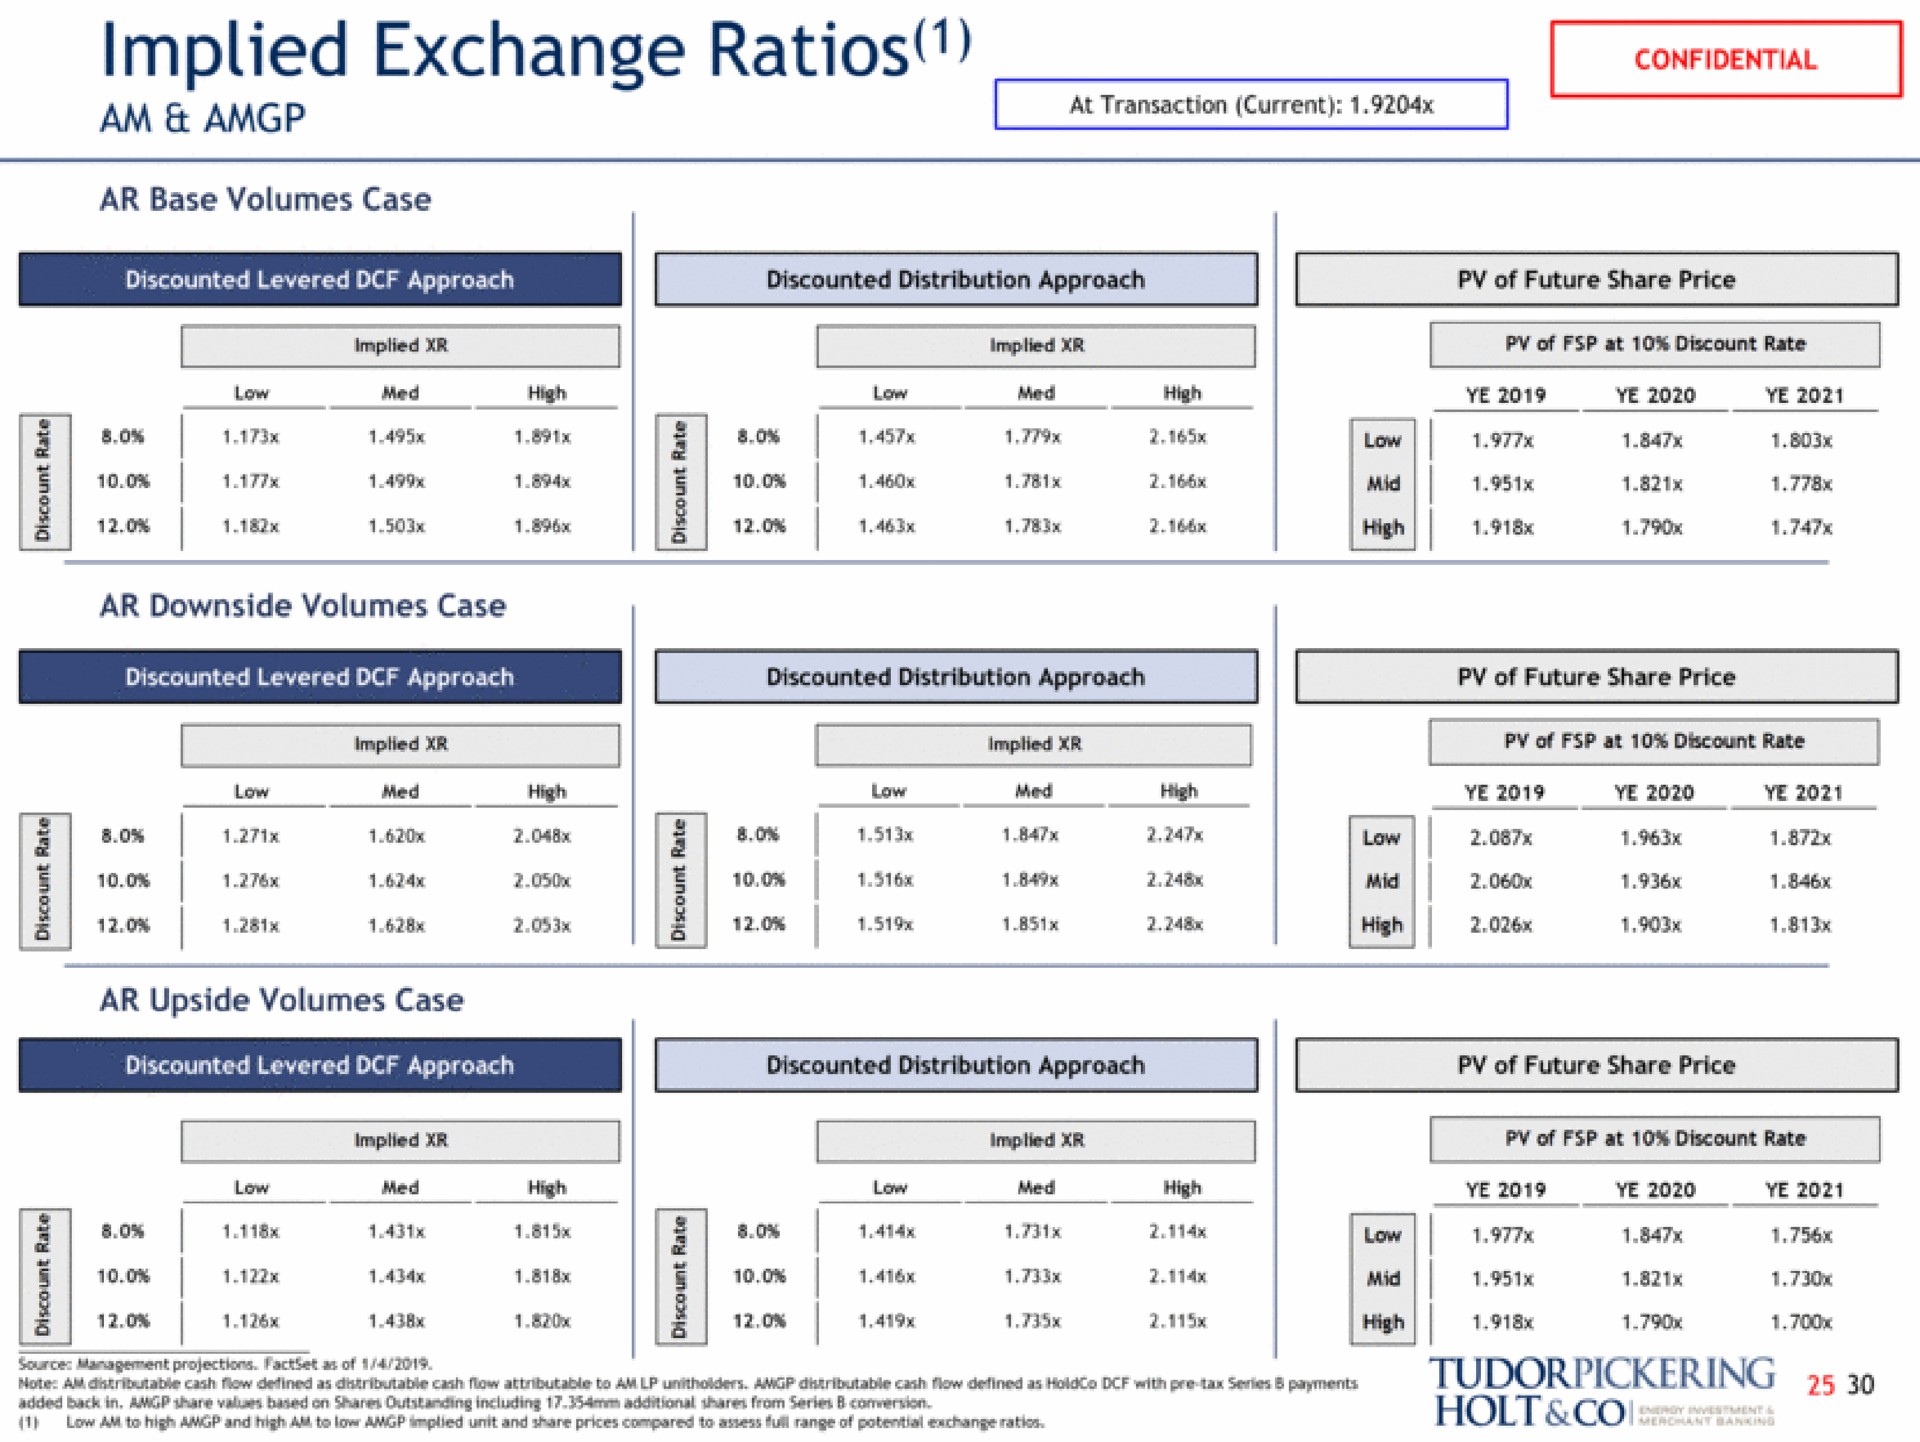 implied exchange ratios pee tas discounted distribution approach a a dace of future share price | Tudor, Pickering, Holt & Co